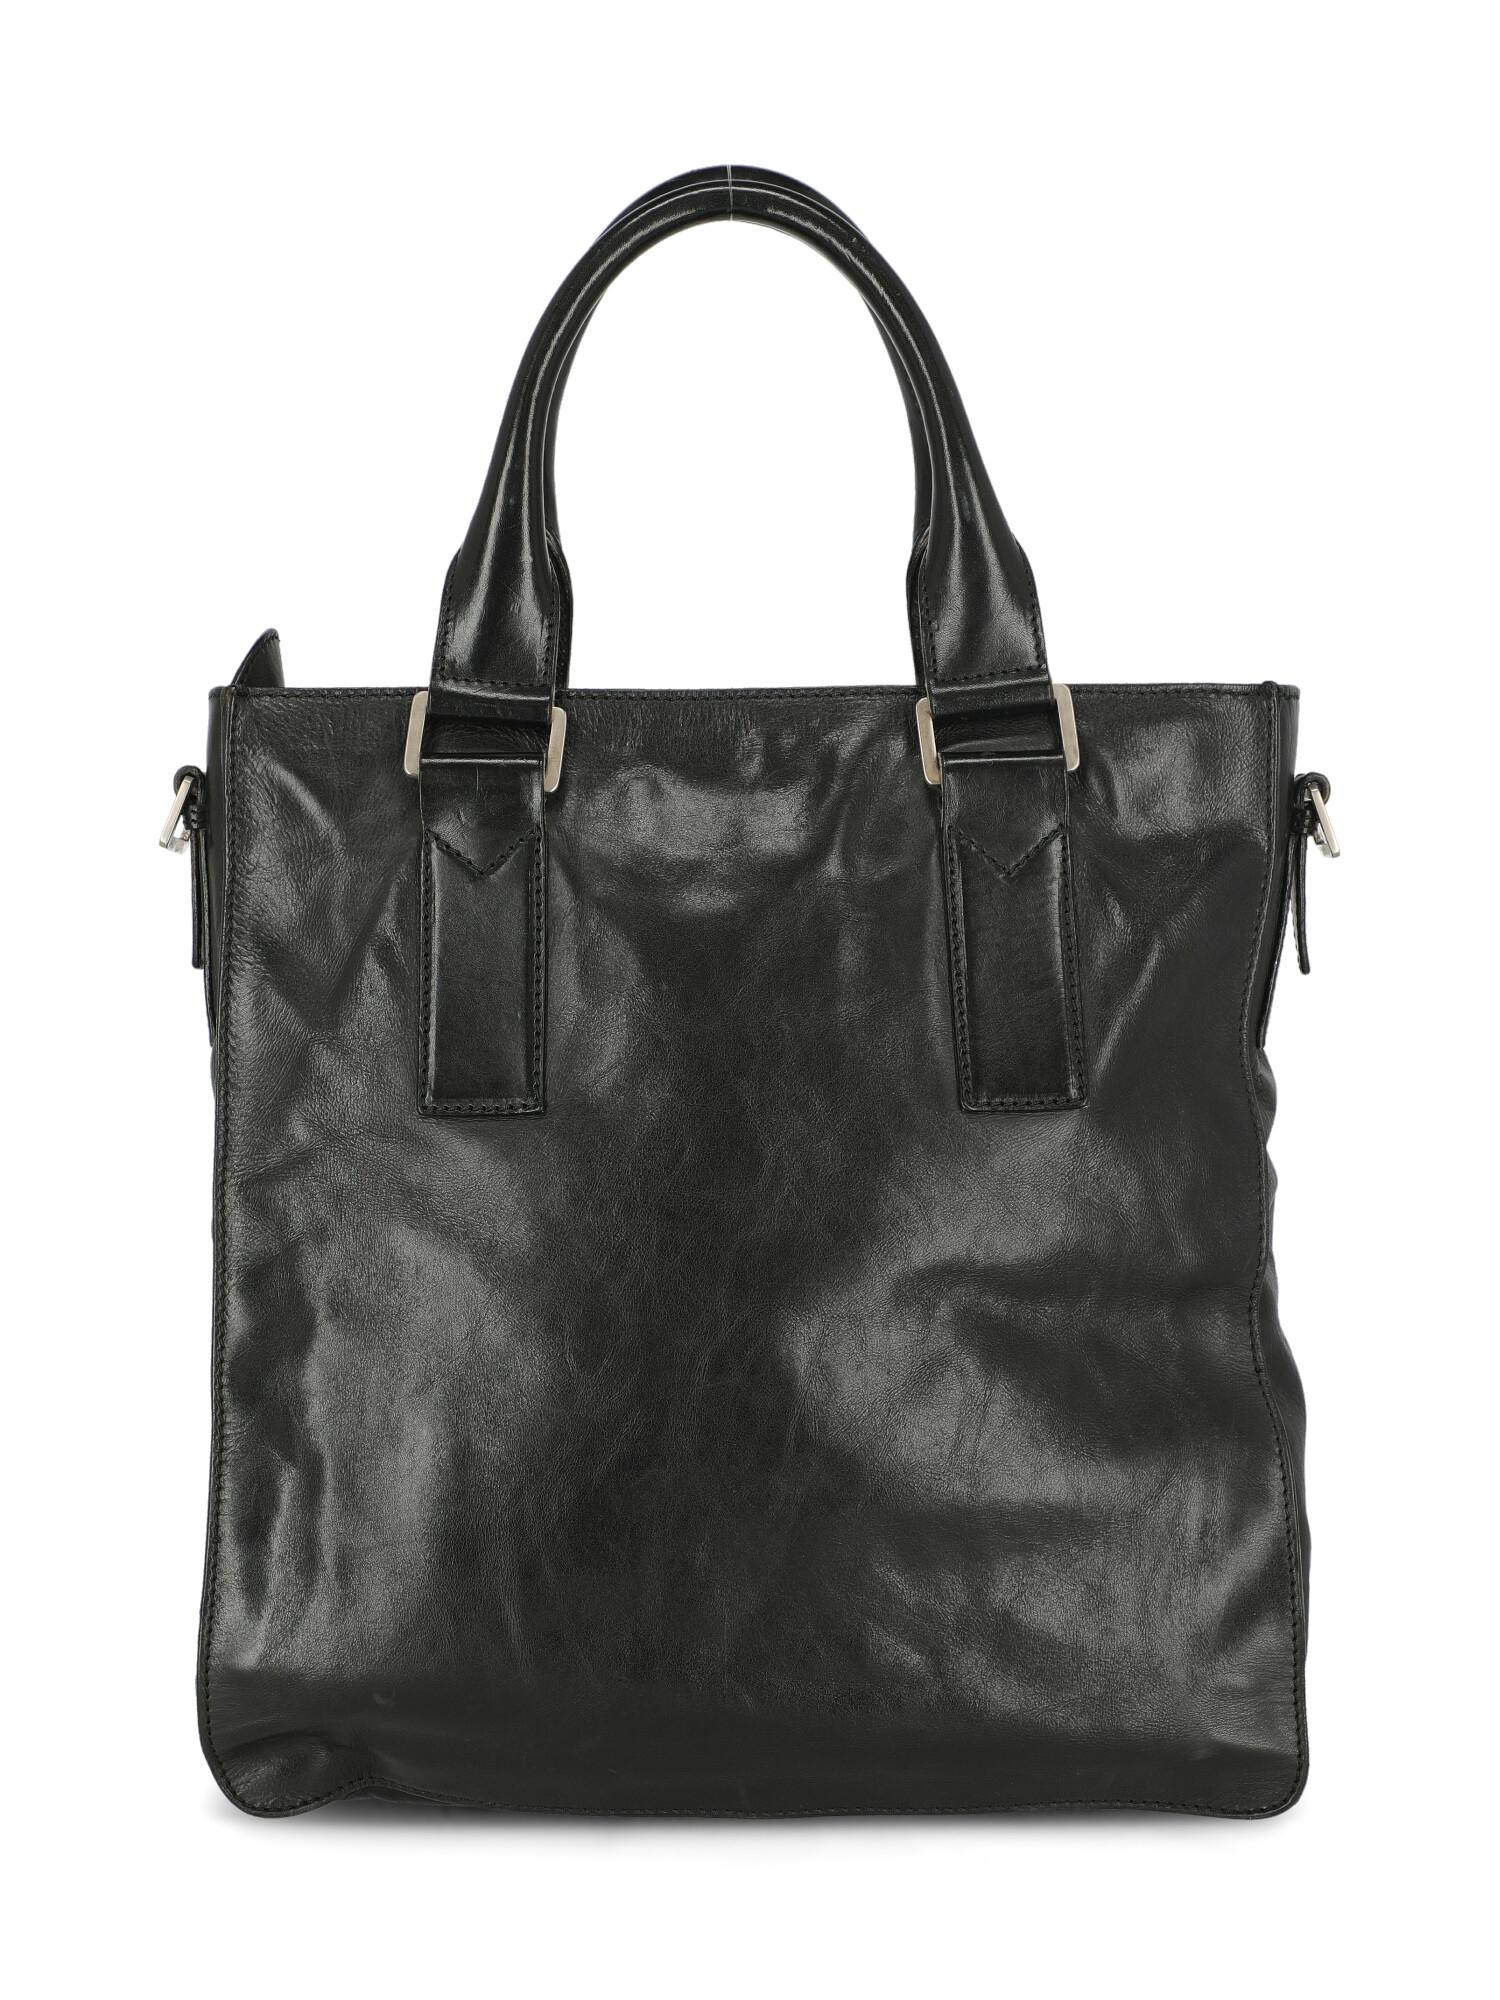 Trussardi Woman Shoulder bag  Black Leather In Fair Condition For Sale In Milan, IT